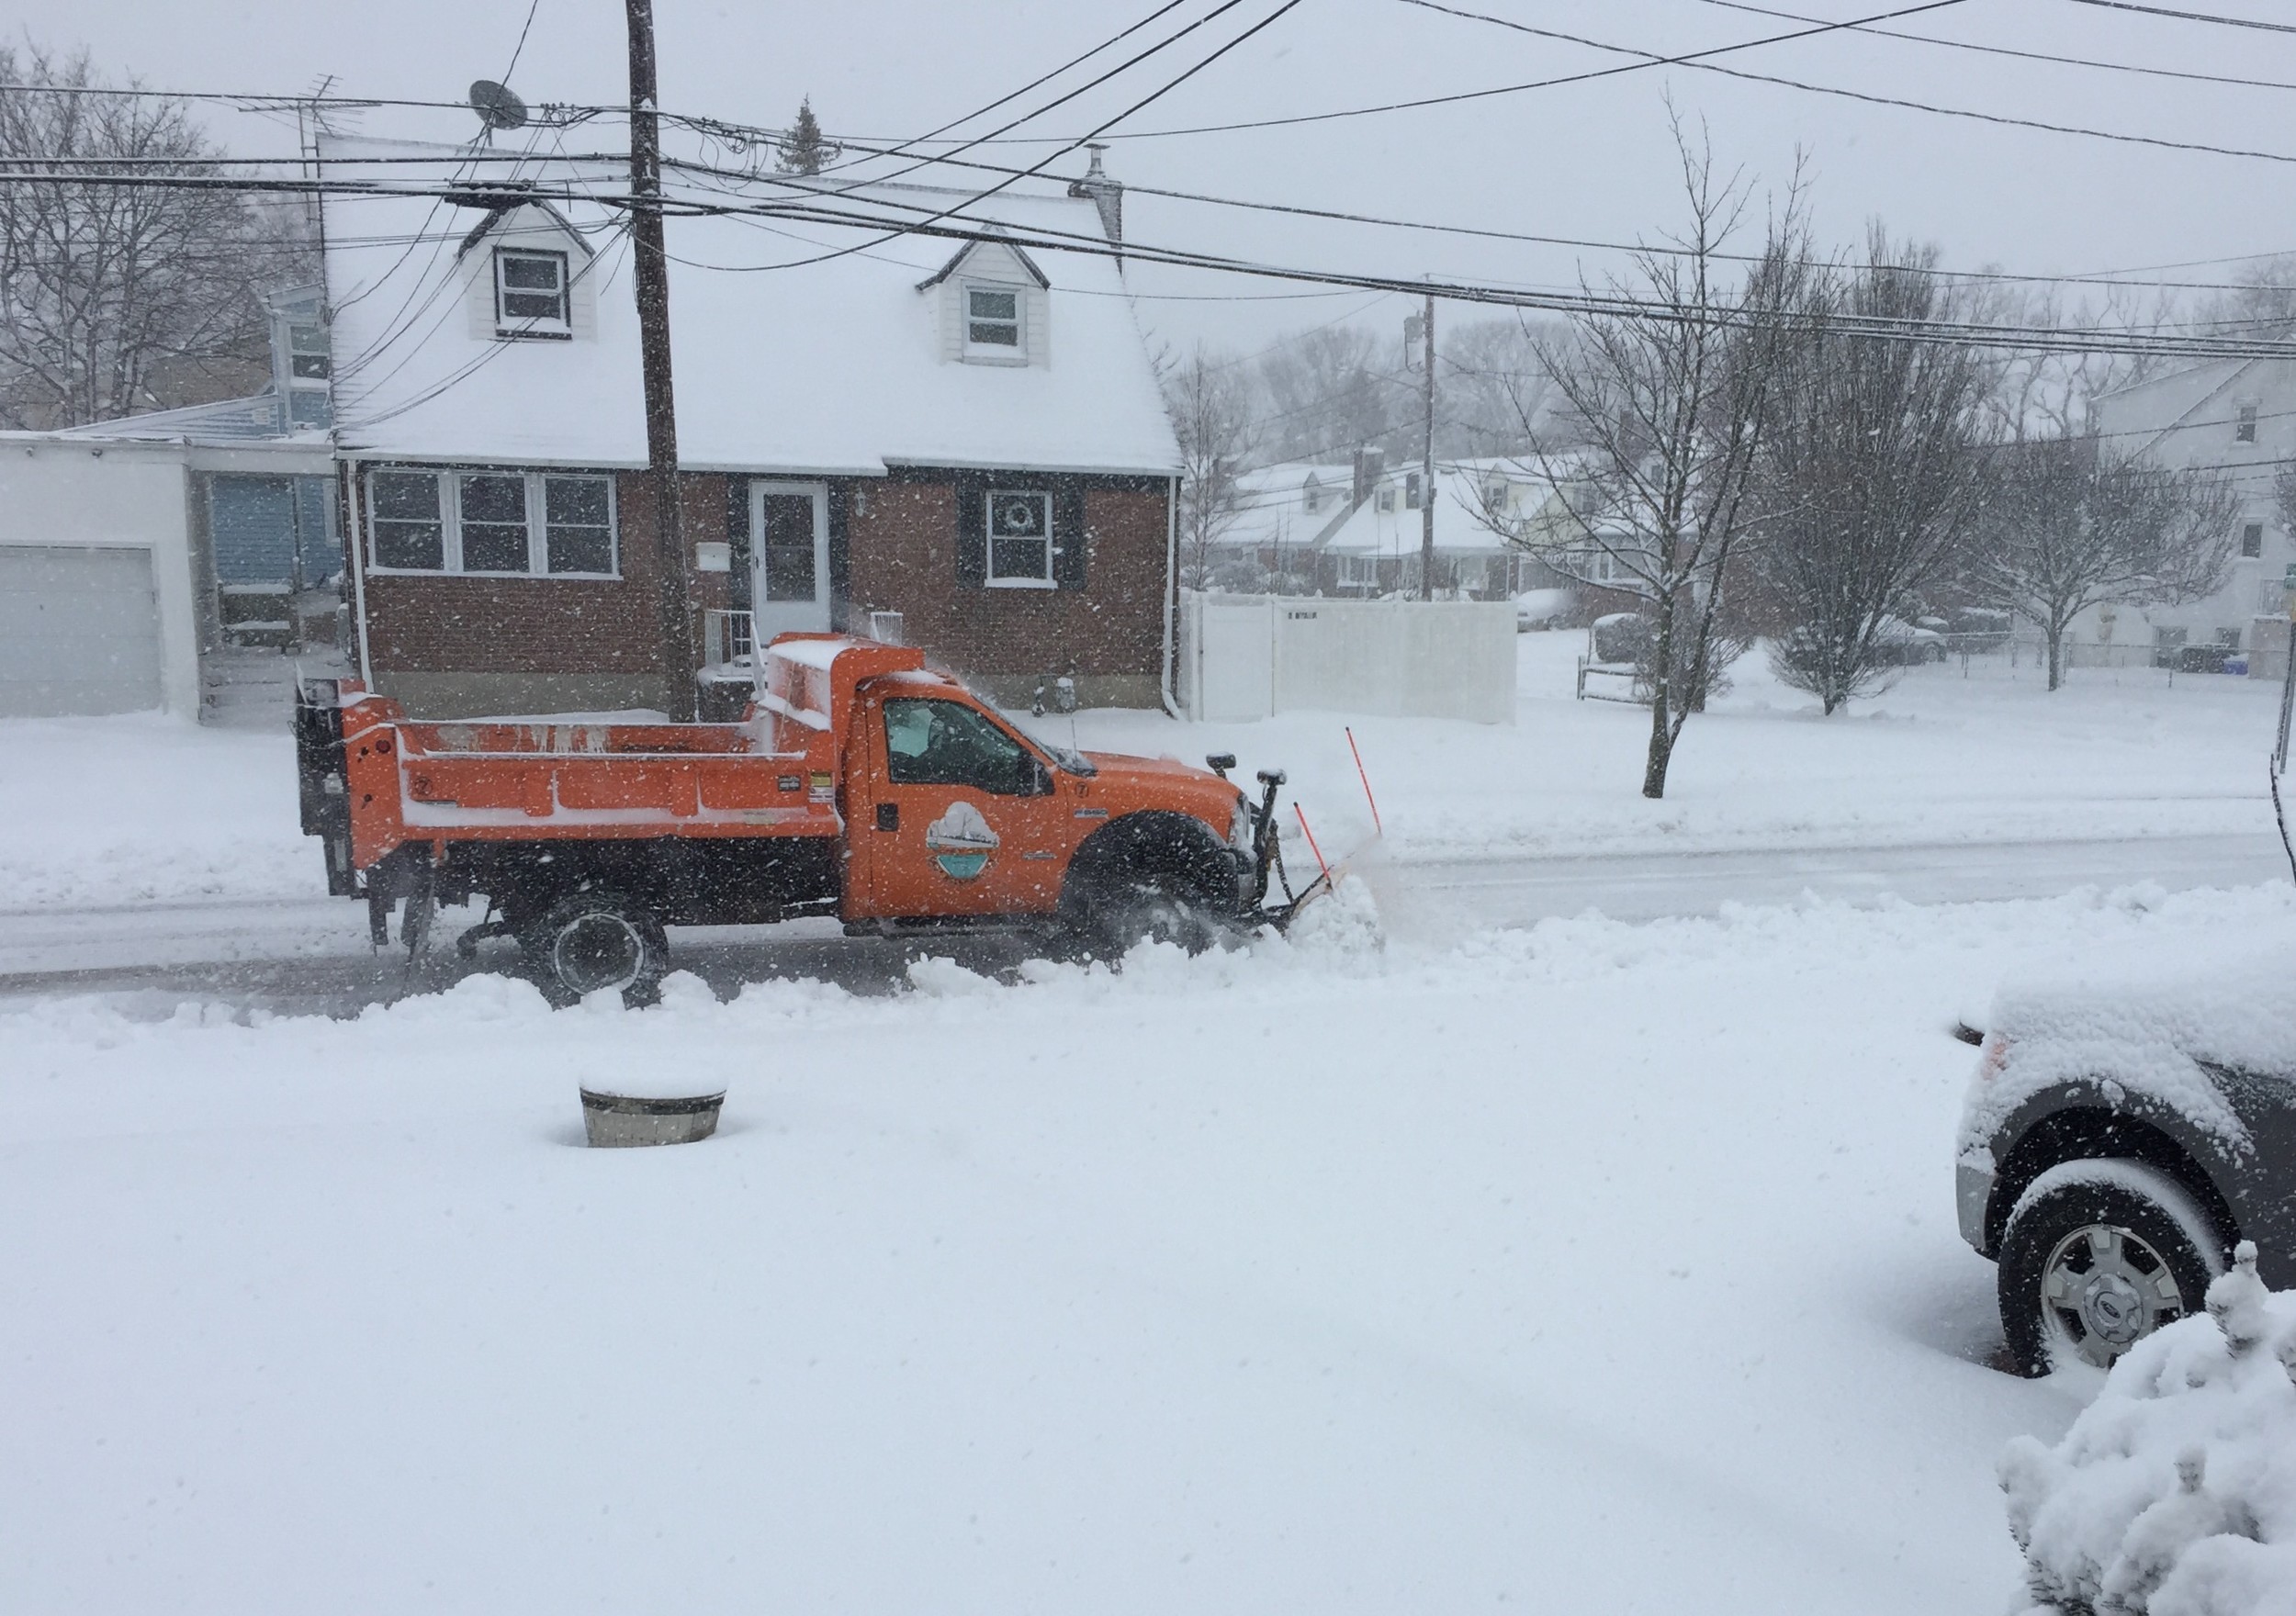 The Department of Public Works began pretreating roads with snow and sand on the eve of the storm.